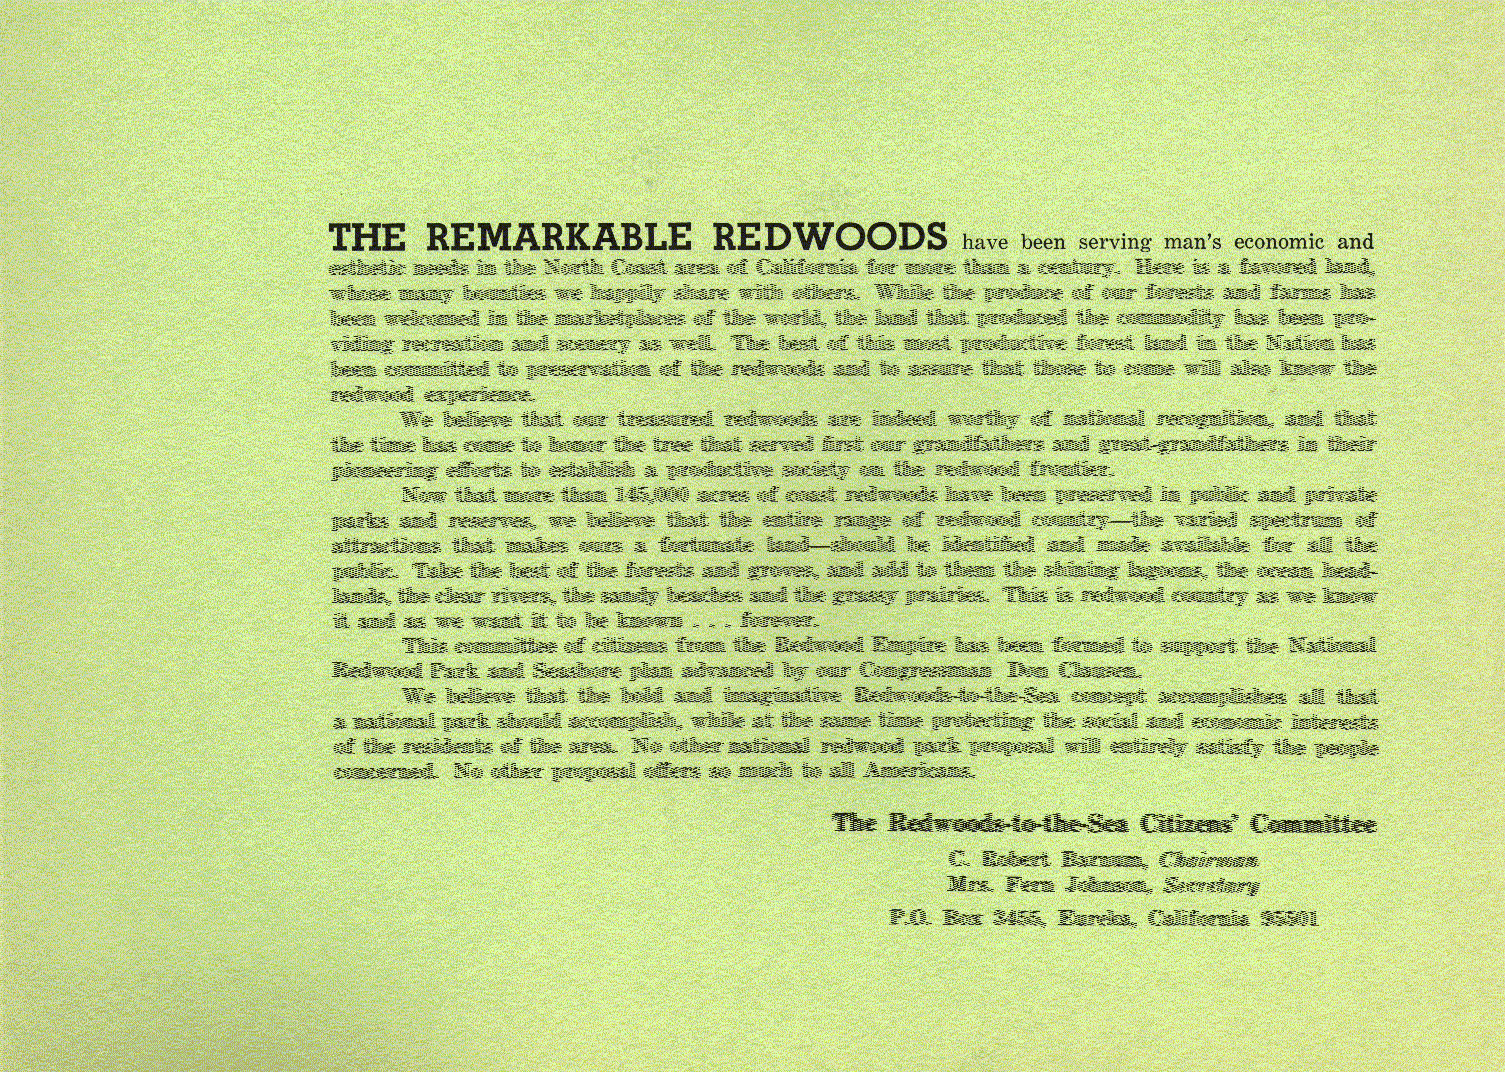 Excerpt from the Remarkable Redwoods